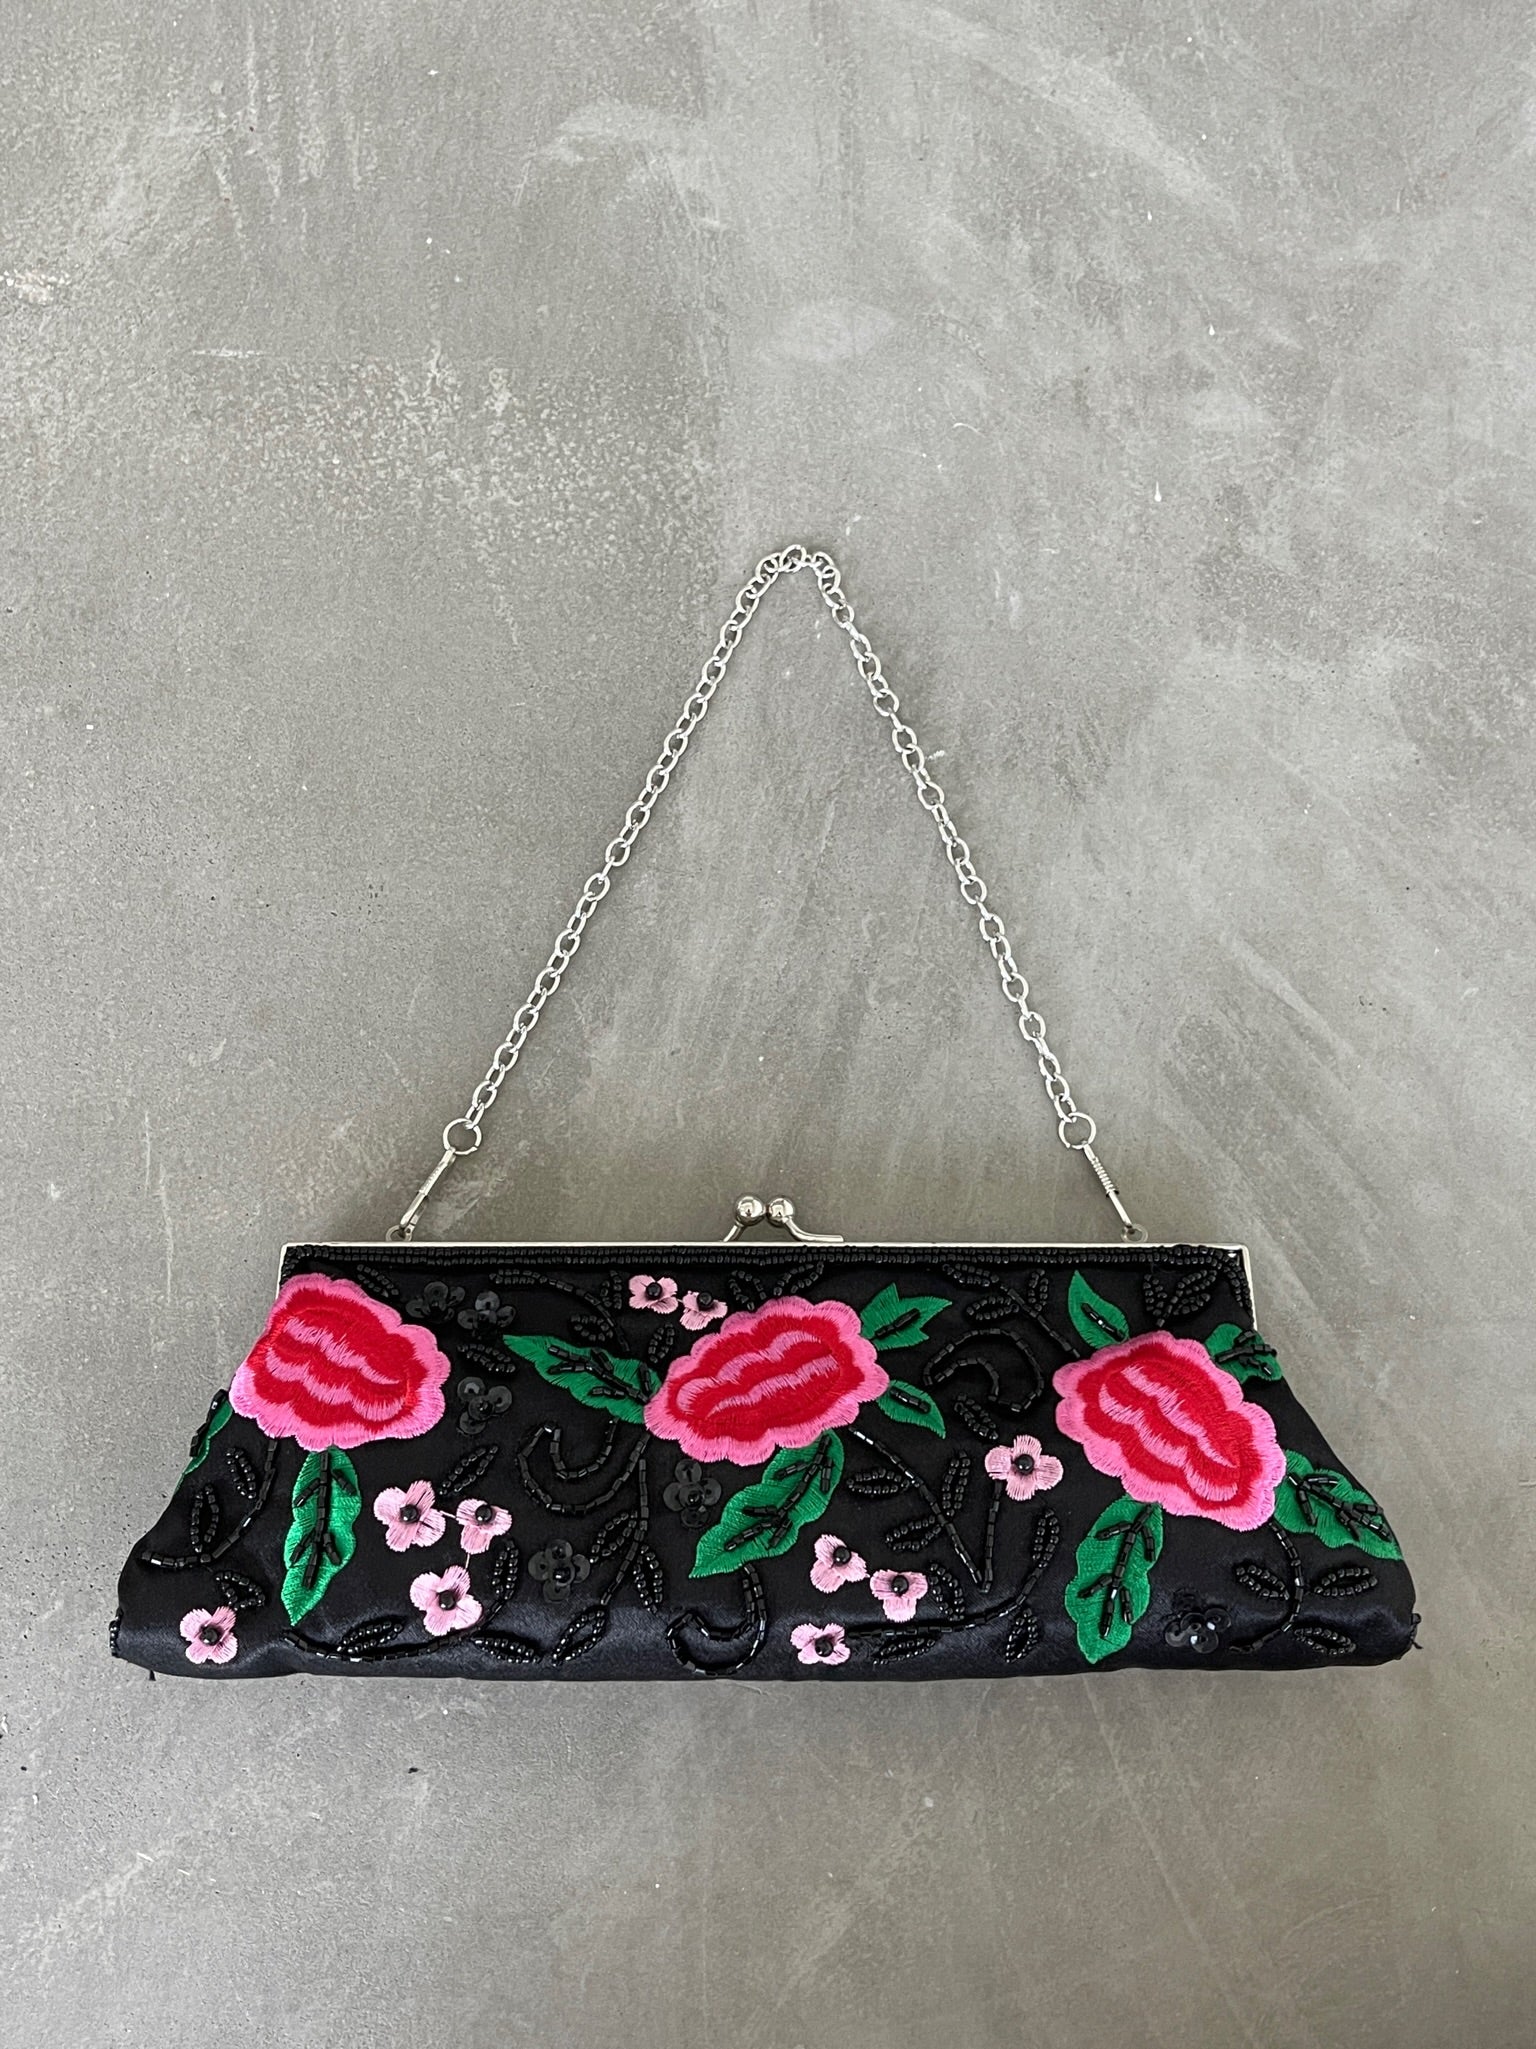 Amazon.com: Embroidered Women Handbags Flower Embroidery Ethnic Shoulder  Bags Hmong Tote Purse : Clothing, Shoes & Jewelry